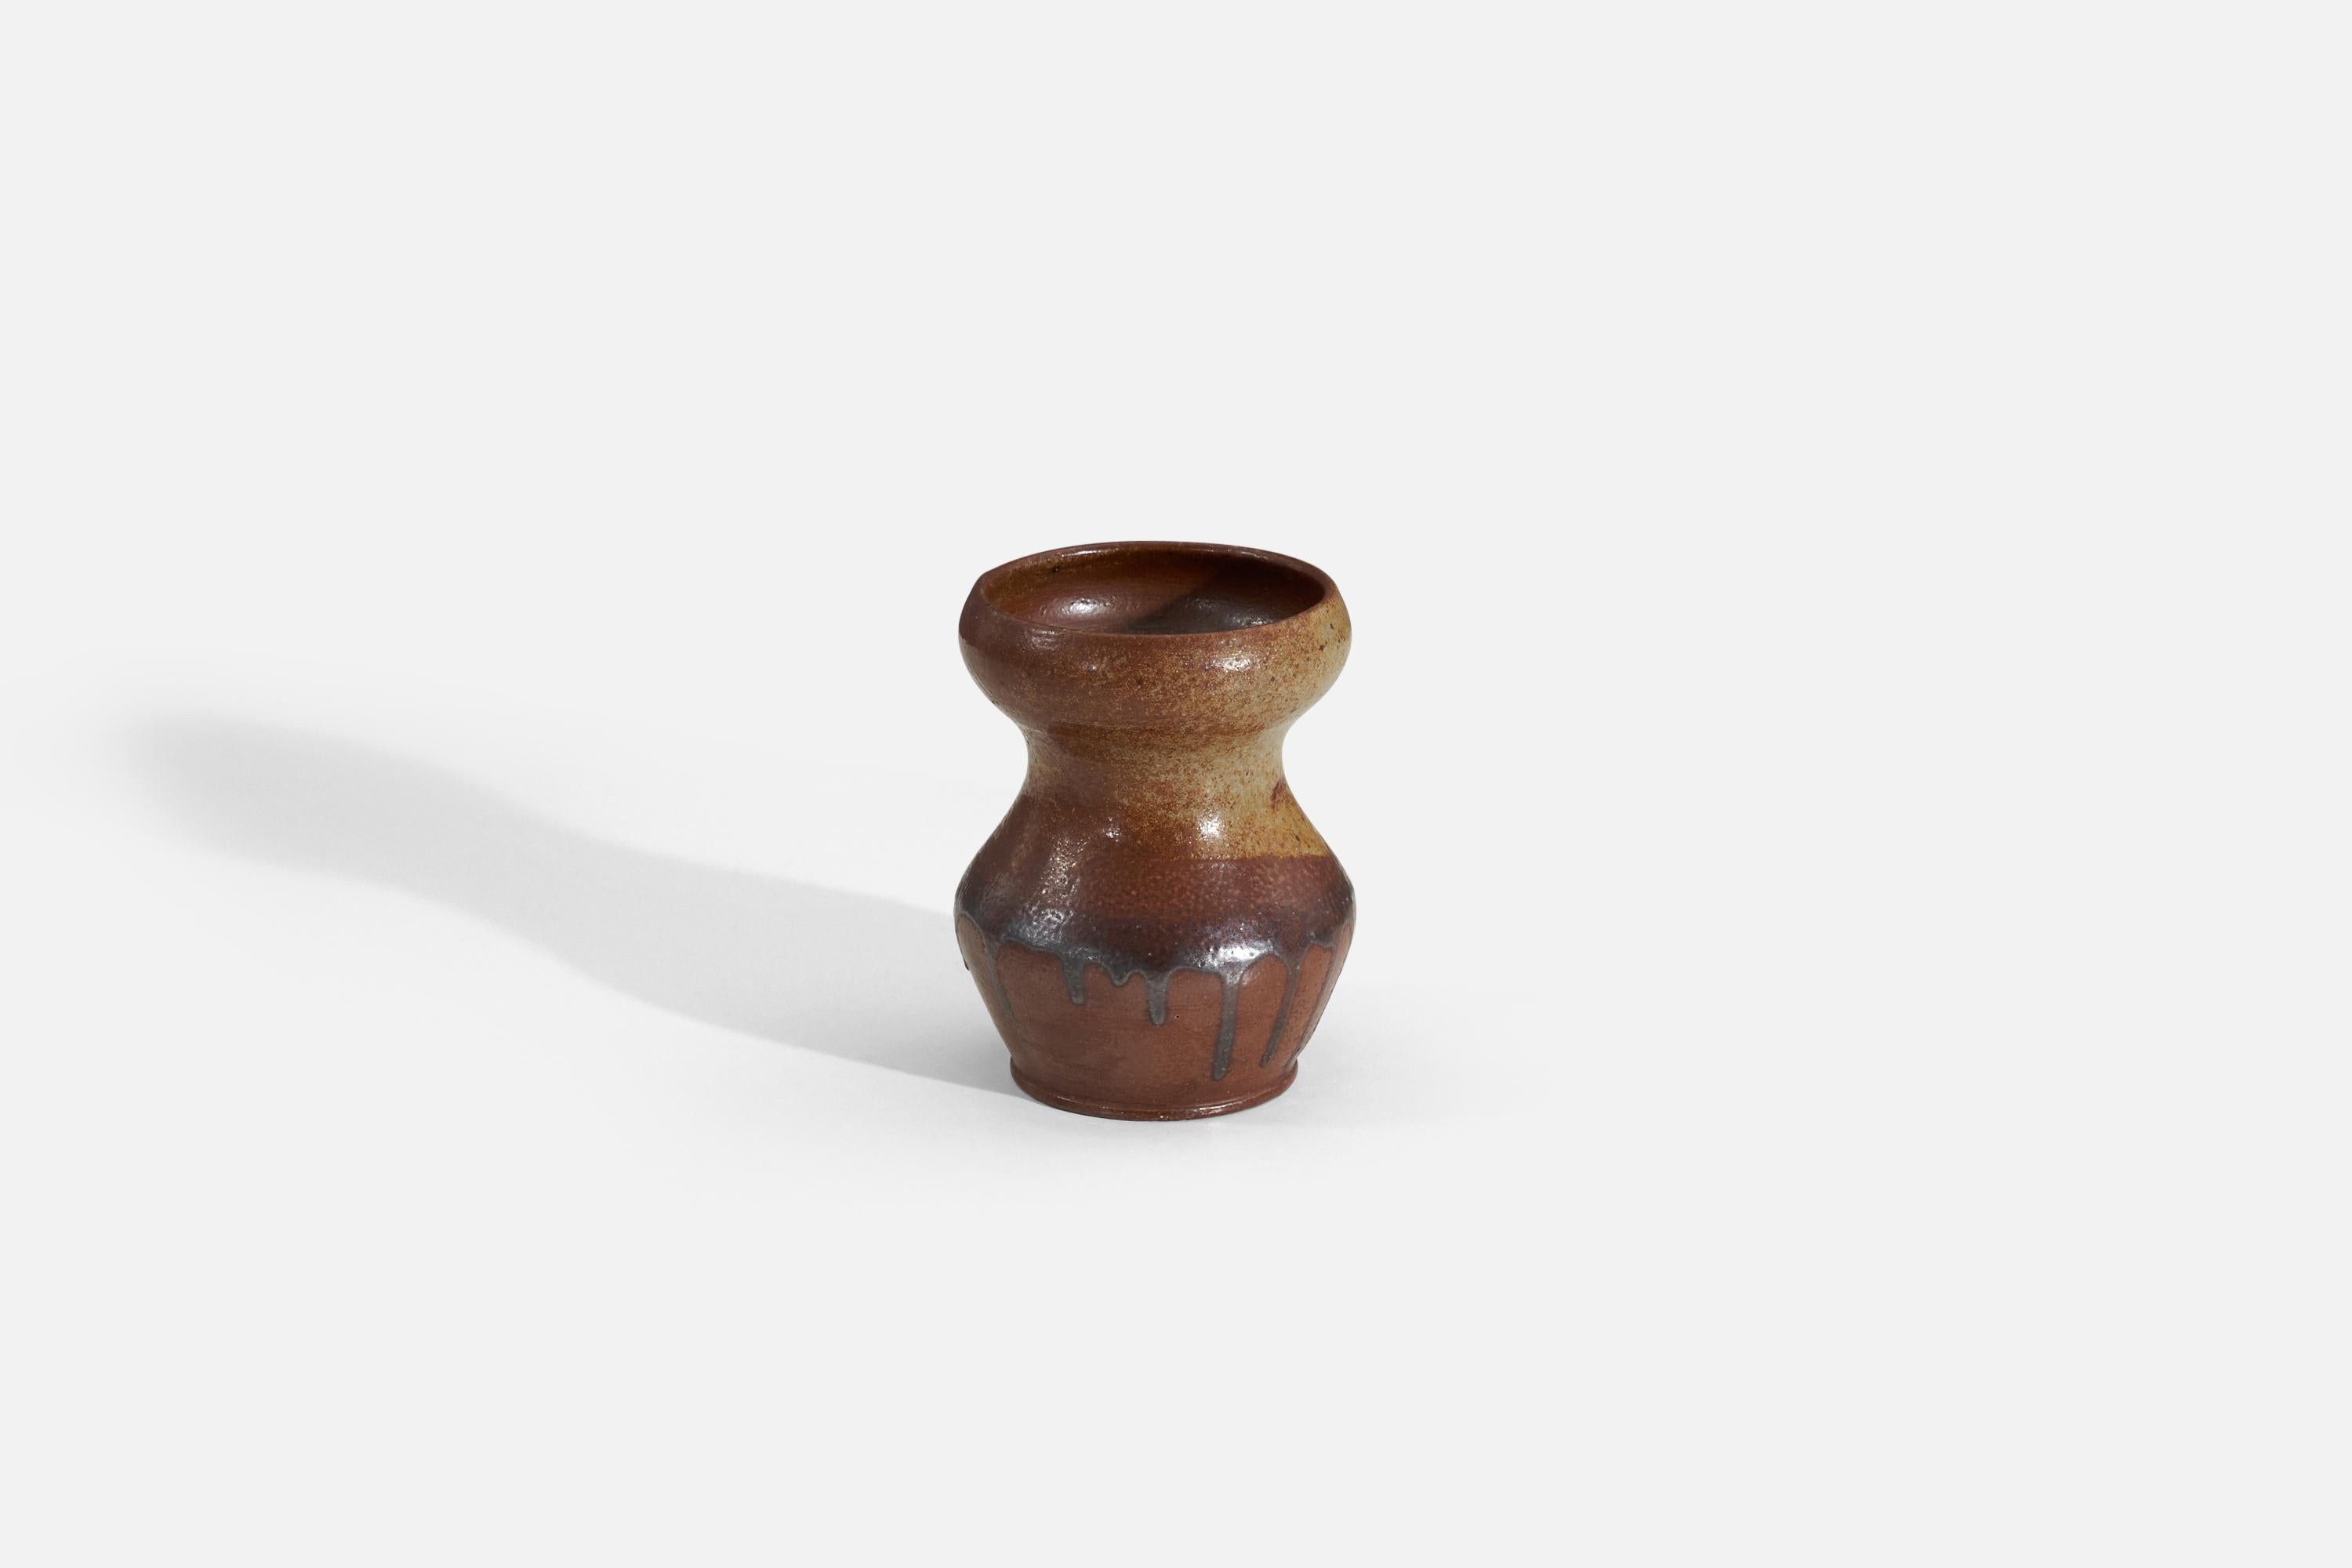 A brown/ yellow glazed organic stoneware vase produced by Raus Keramik, Sweden, c. 1940s.